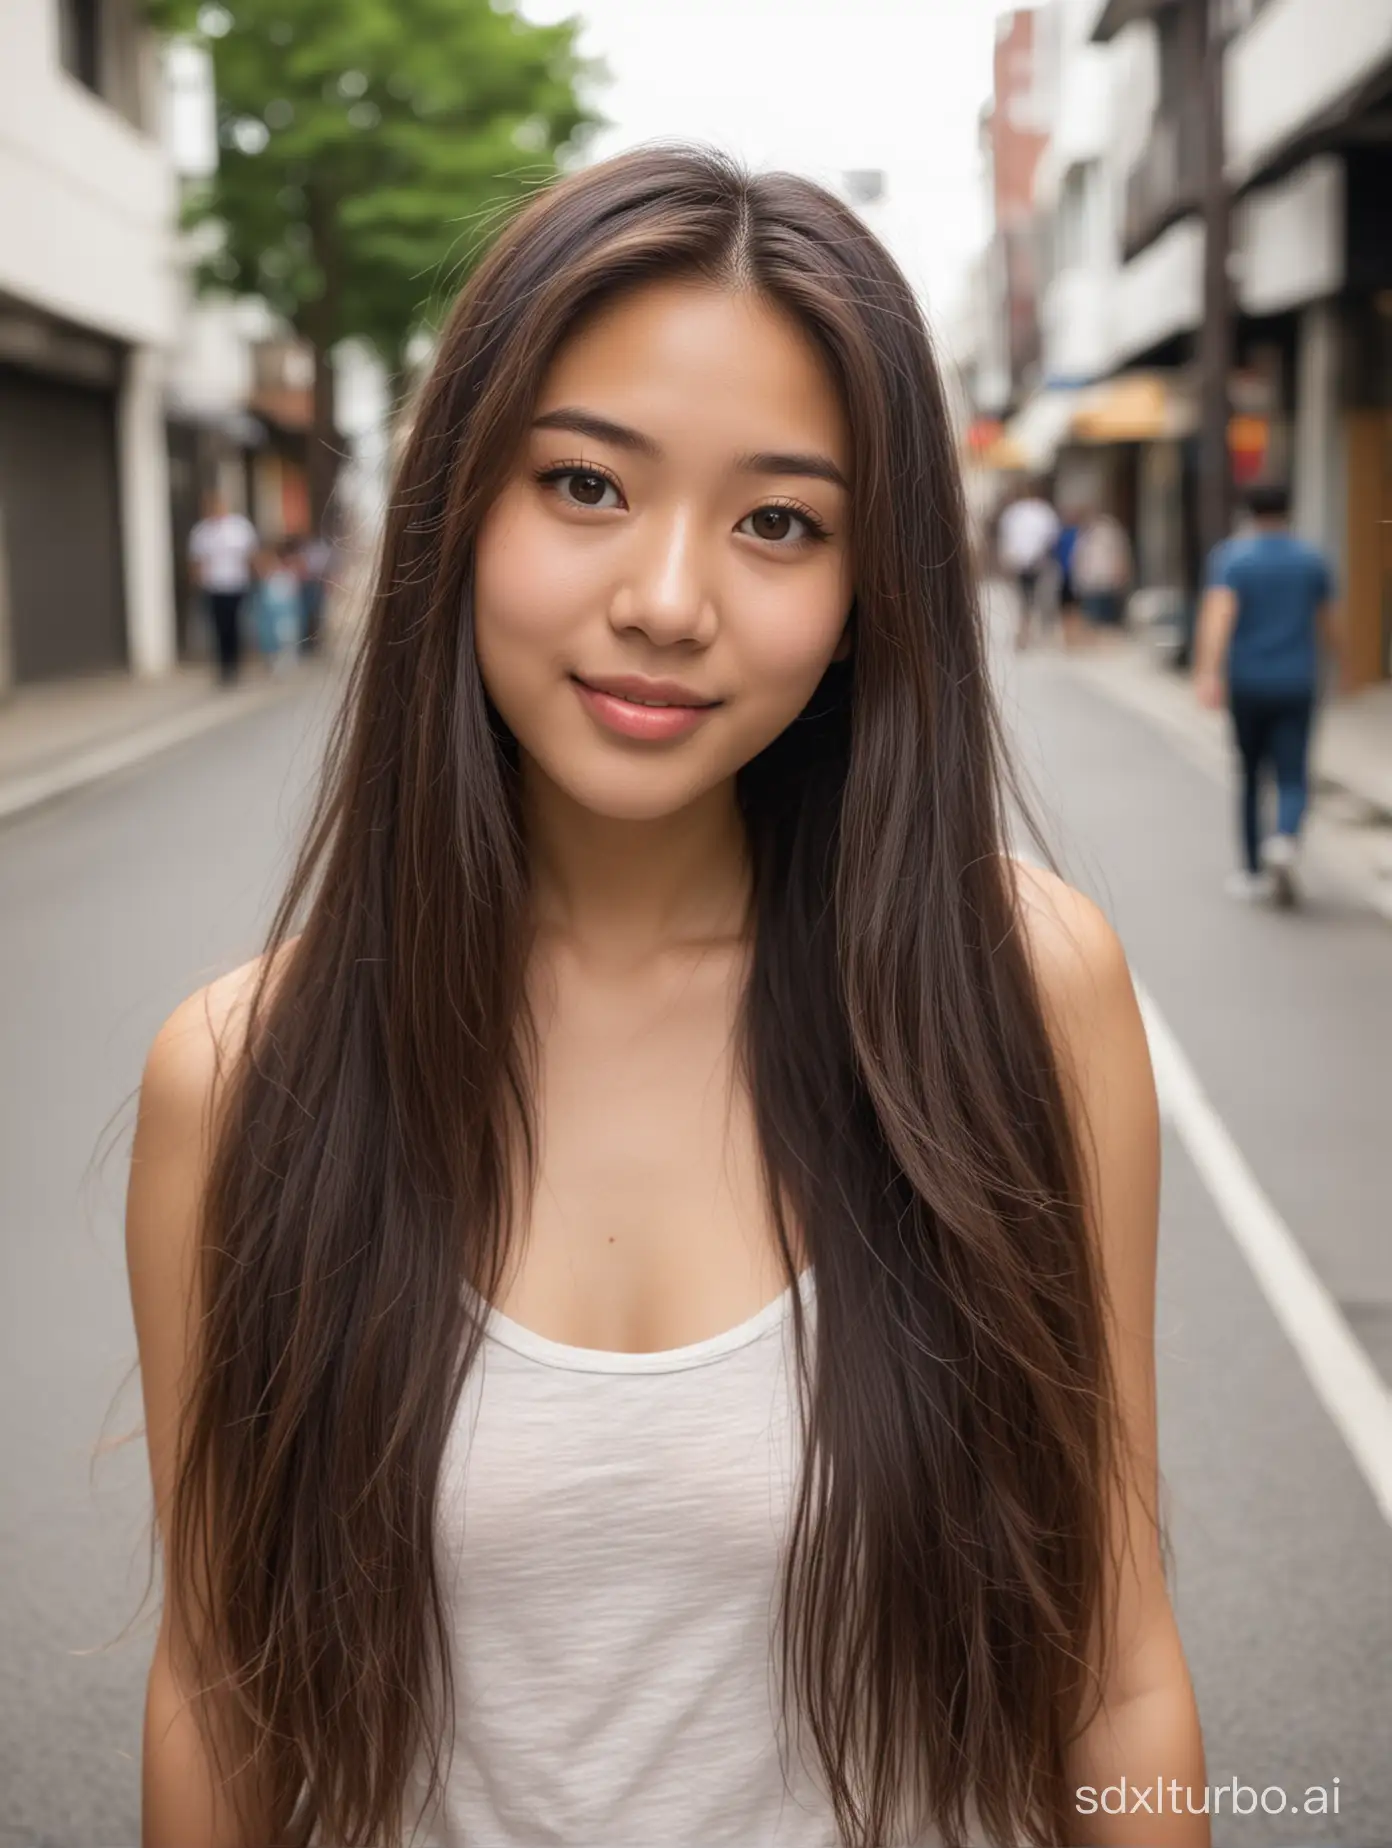 Chinese and Japanese mixed race girl, 18 years old, plump, beautiful, with long flowing hair, standing on the street looking at the camera with affection, half-length shot